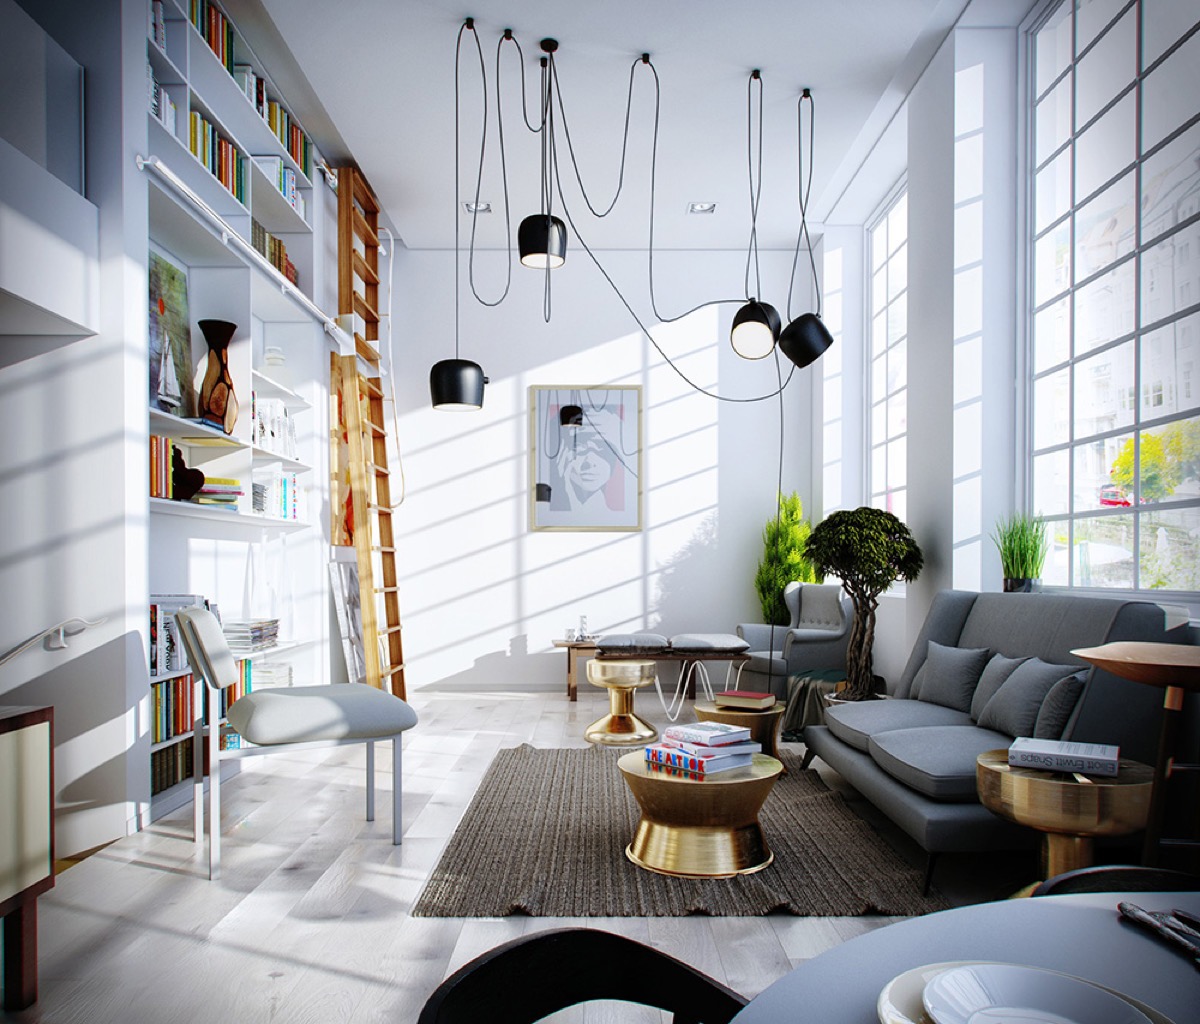 Ideas for decorating living spaces "width =" 1200 "height =" 1024 "srcset =" https://mileray.com/wp-content/uploads/2020/05/1588515909_147_Combining-Modern-and-Minimalist-Living-Room-Interior-Designs-Which-Looks.jpg 1200w, https: // myfashionos .com /wp-content/uploads/2016/04/Emotion-School-300x256.jpg 300w, https://mileray.com/wp-content/uploads/2016/04/Emotion-School-768x655.jpg 768w, https : / /mileray.com/wp-content/uploads/2016/04/Emotion-School-1024x874.jpg 1024w, https://mileray.com/wp-content/uploads/2016/04/Emotion-School-696x594. jpg 696w, https://mileray.com/wp-content/uploads/2016/04/Emotion-School-1068x911.jpg 1068w, https://mileray.com/wp-content/uploads/2016/04/Emotion- School- 492x420.jpg 492w "sizes =" (maximum width: 1200px) 100vw, 1200px